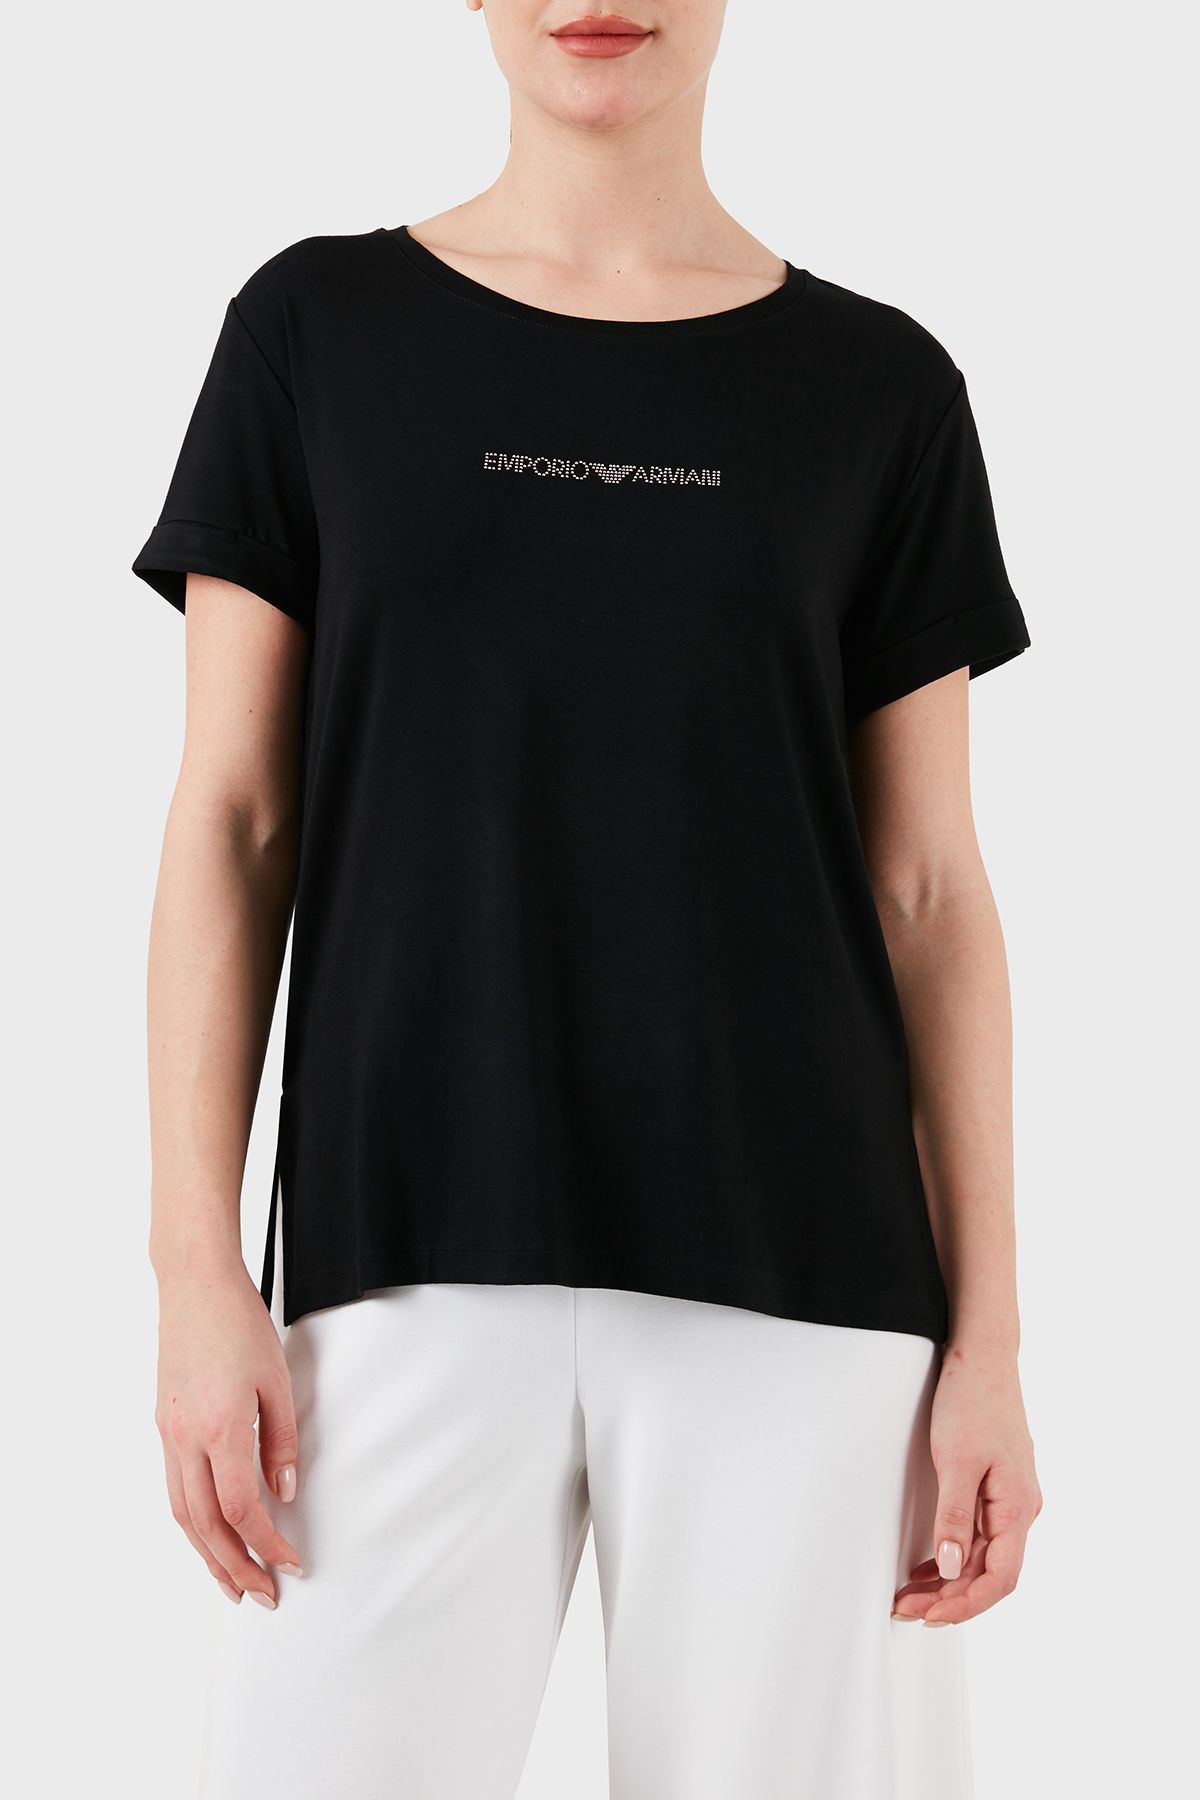 Emporio Armani Relaxed Fit Bisiklet Yaka T Shirt  T SHİRT 262633 4R314 00020